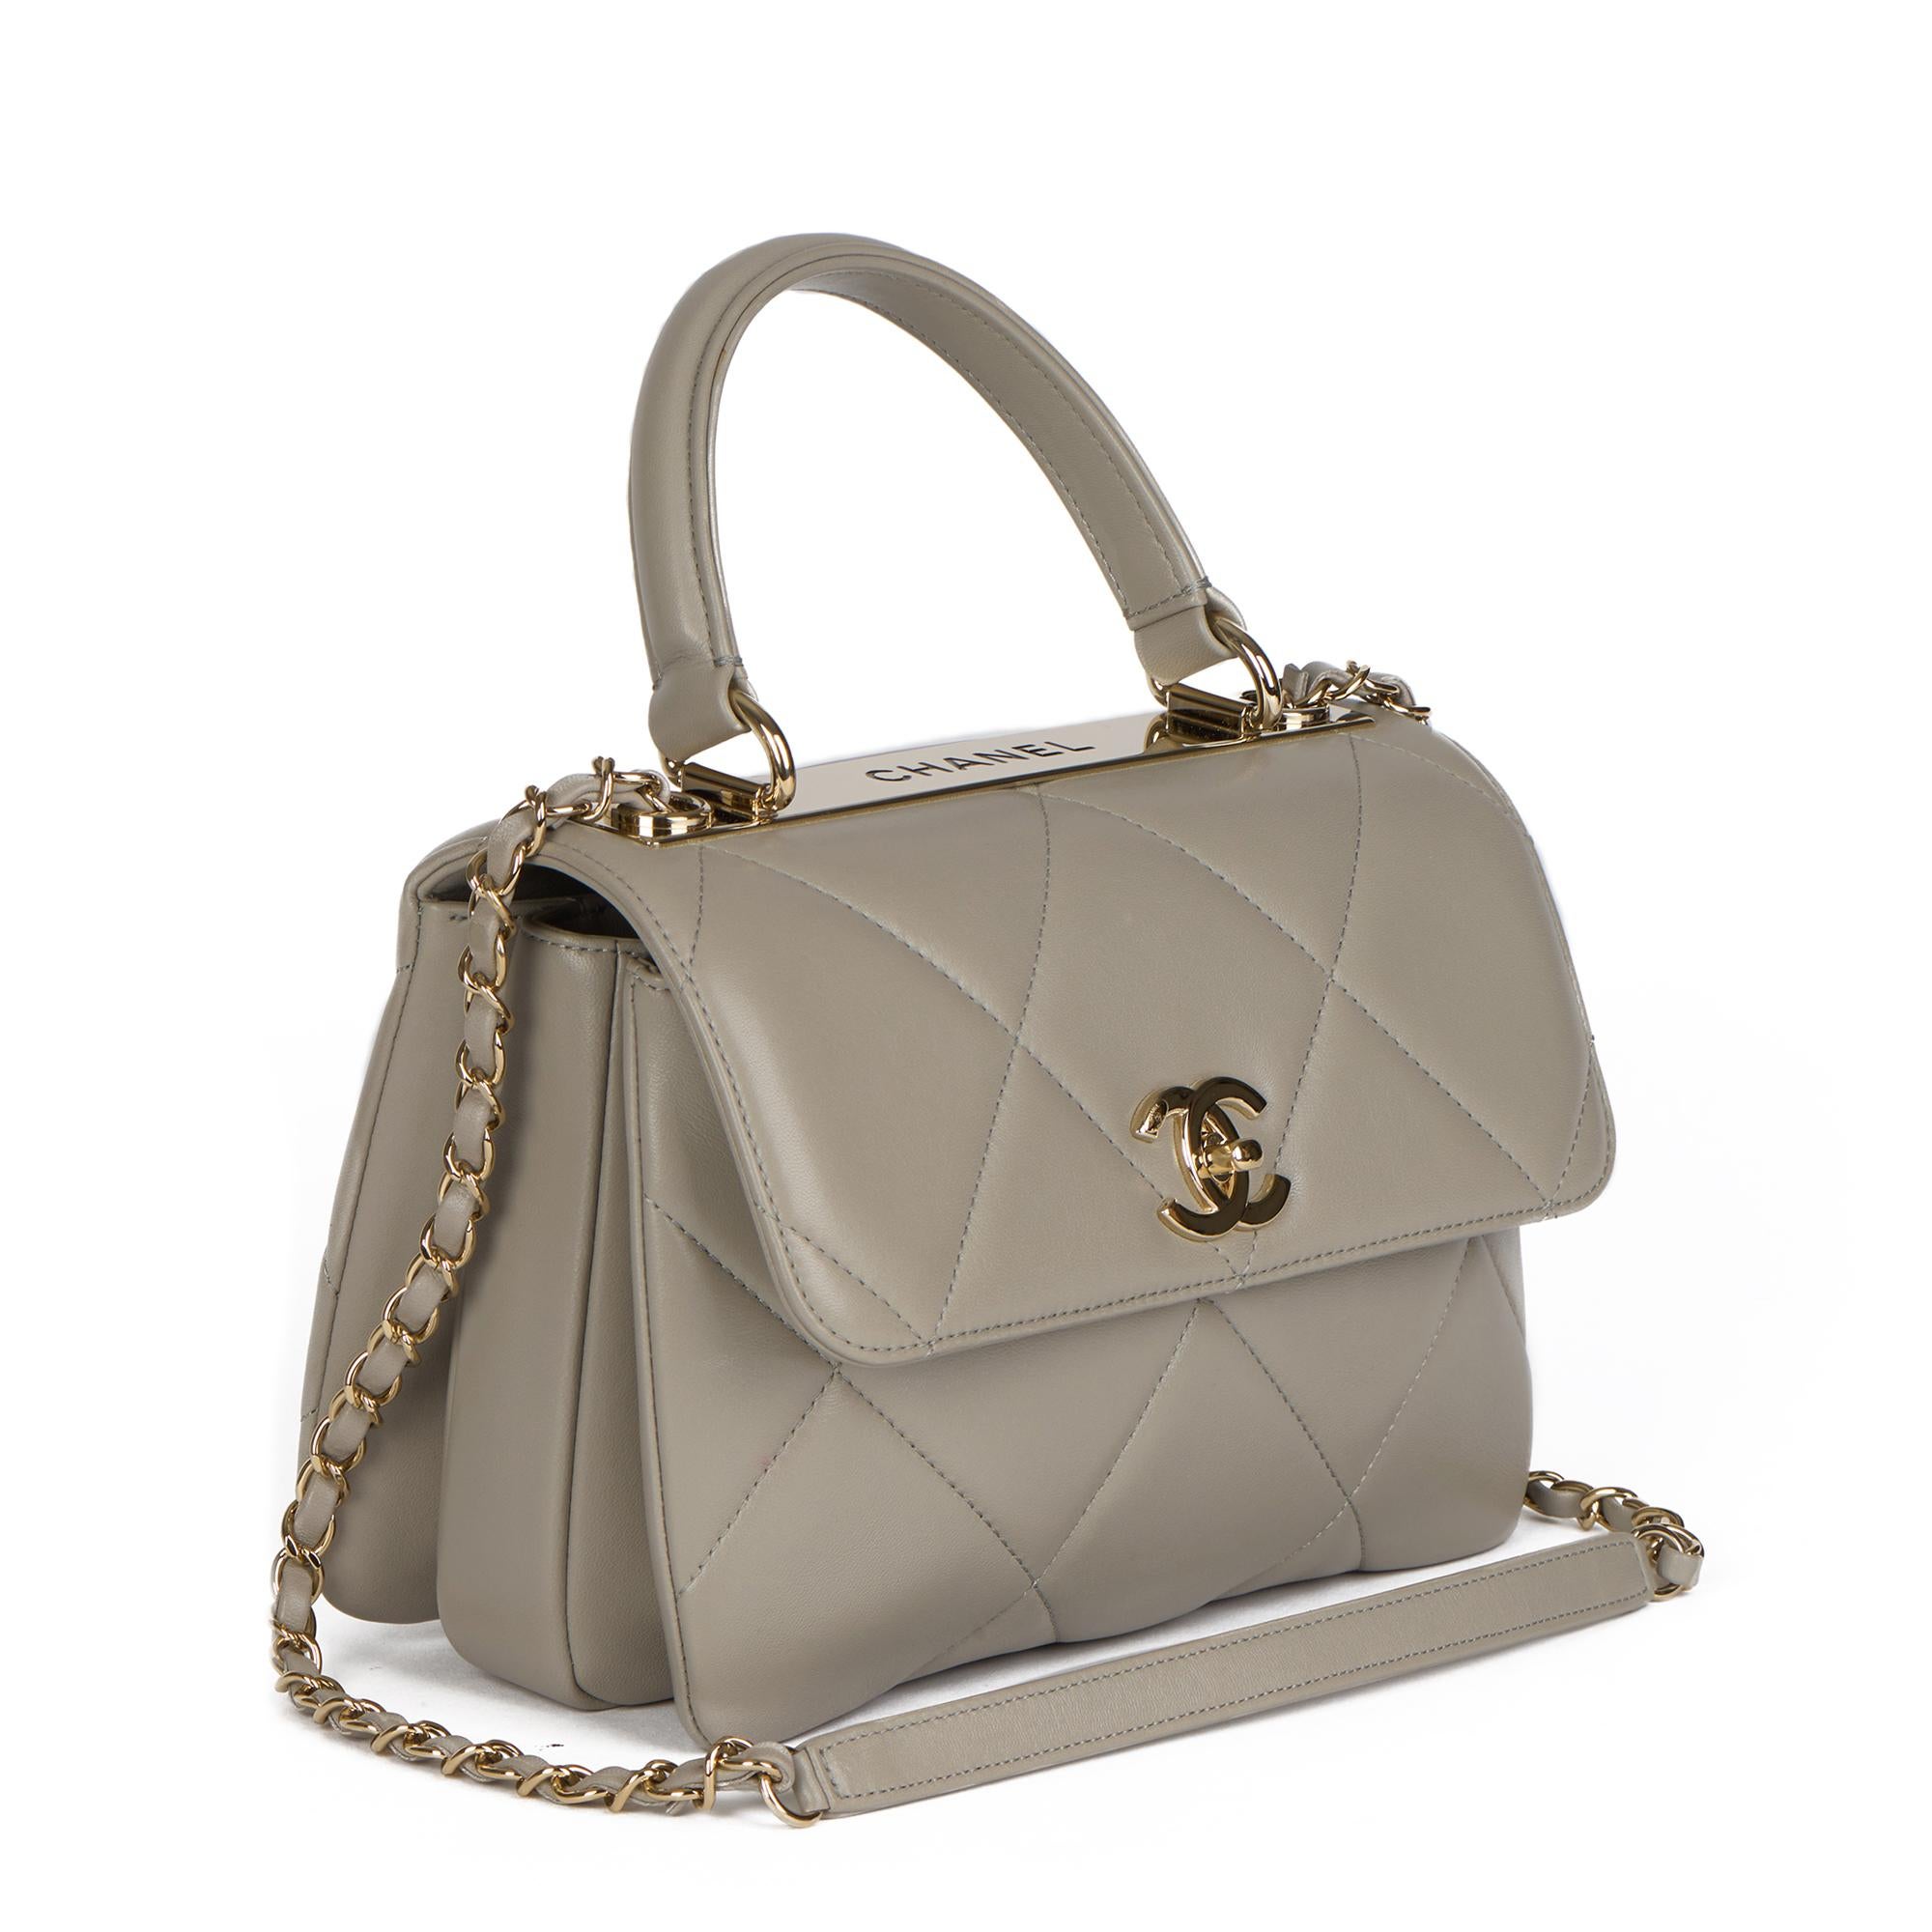 CHANEL
Grey Quilted Lambskin Leather Small Trendy CC Top Handle Flap Bag

Xupes Reference: HB4439
Serial Number: 28739138
Age (Circa): 2019
Accompanied By: Chanel Dust Bag, Box, Authenticity Card, Receipt, Invoice, Care Booklet
Authenticity Details: